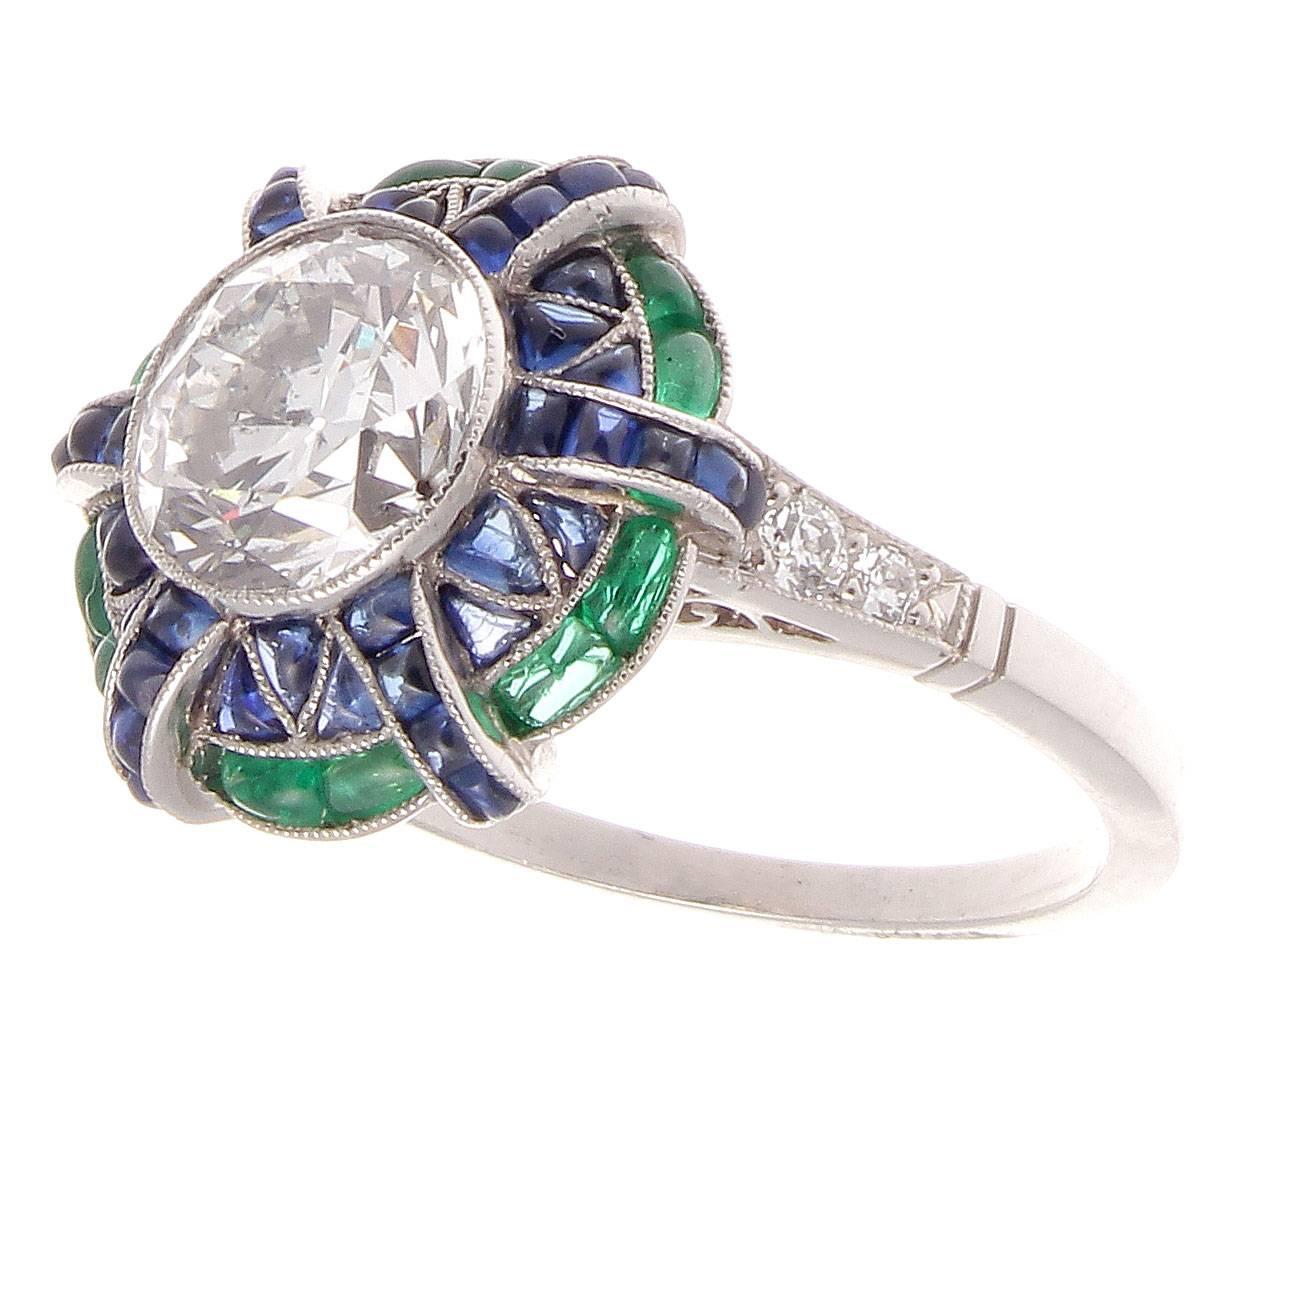 Creativity expressed through superior abstract design filled with colorful gemstones. Featuring a 2.05 carat old European cut diamond that is E color, SI2 clarity surrounded by galaxies of calibrated royal blue sapphires and forest green emeralds.